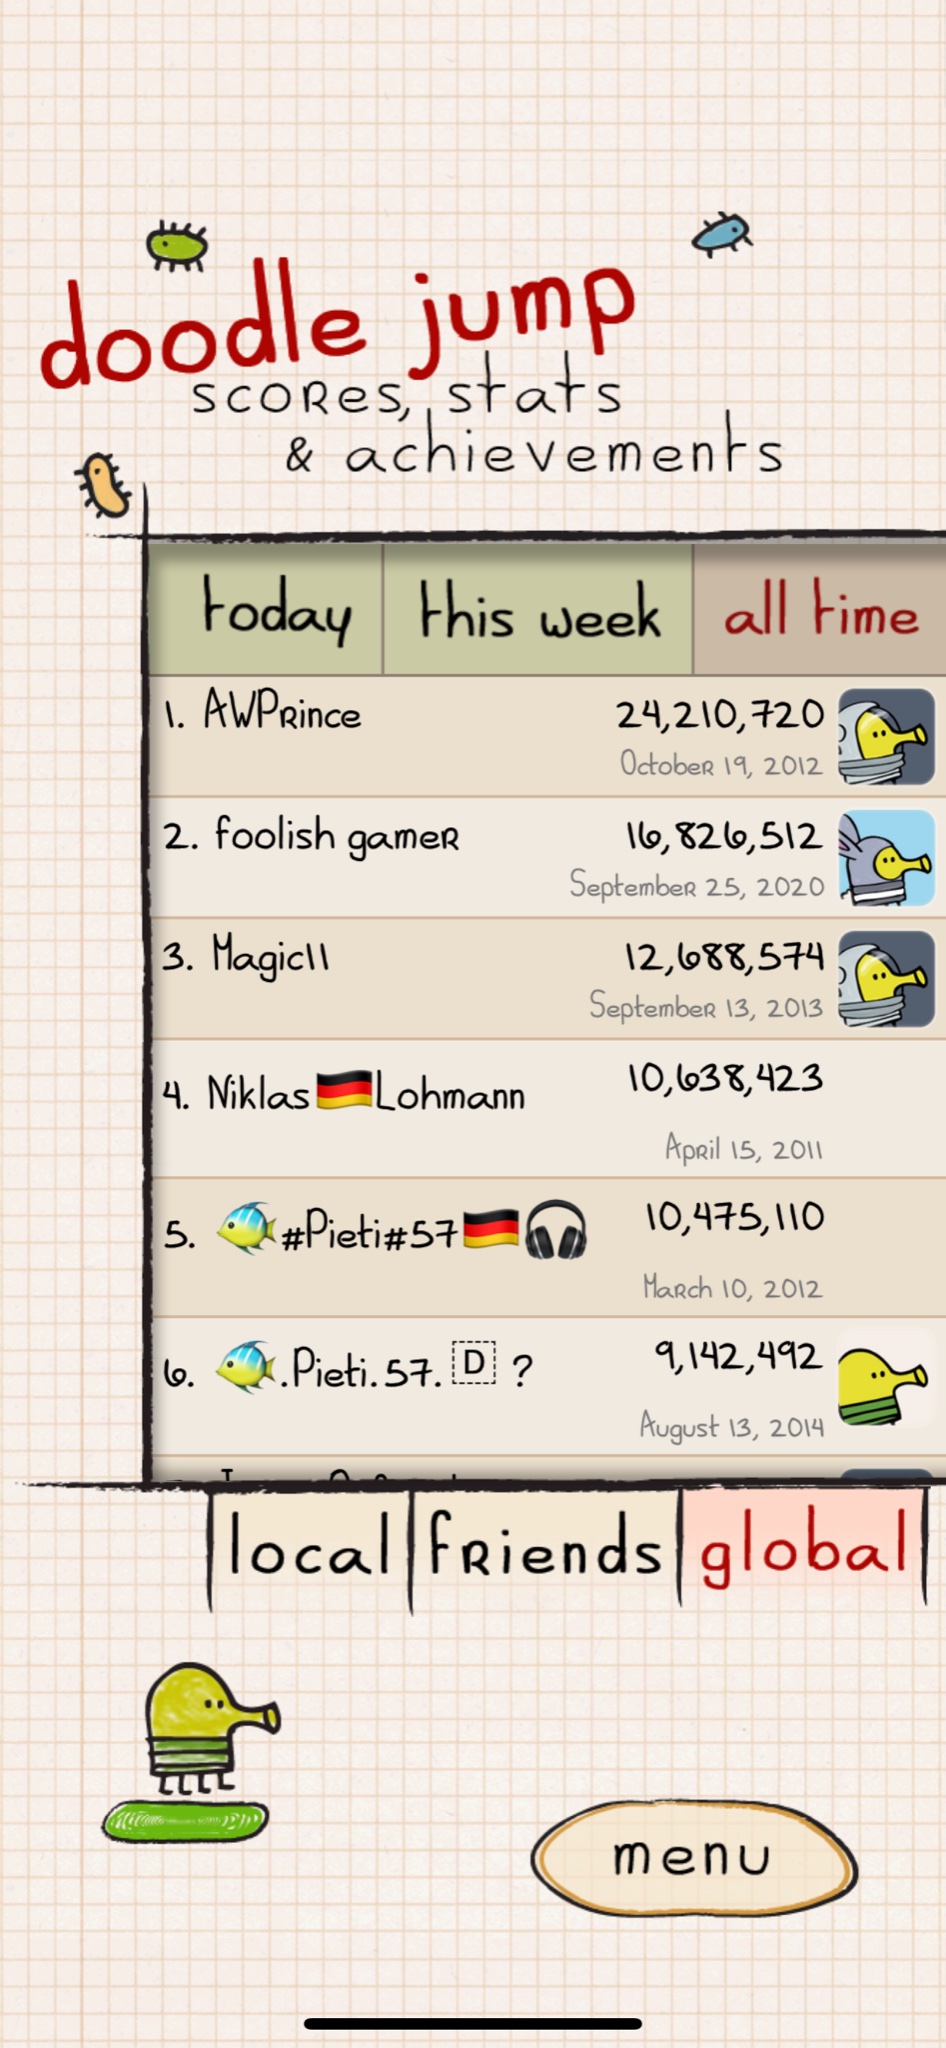 AW Prince on X: First 100k game of Doodle Jump 2